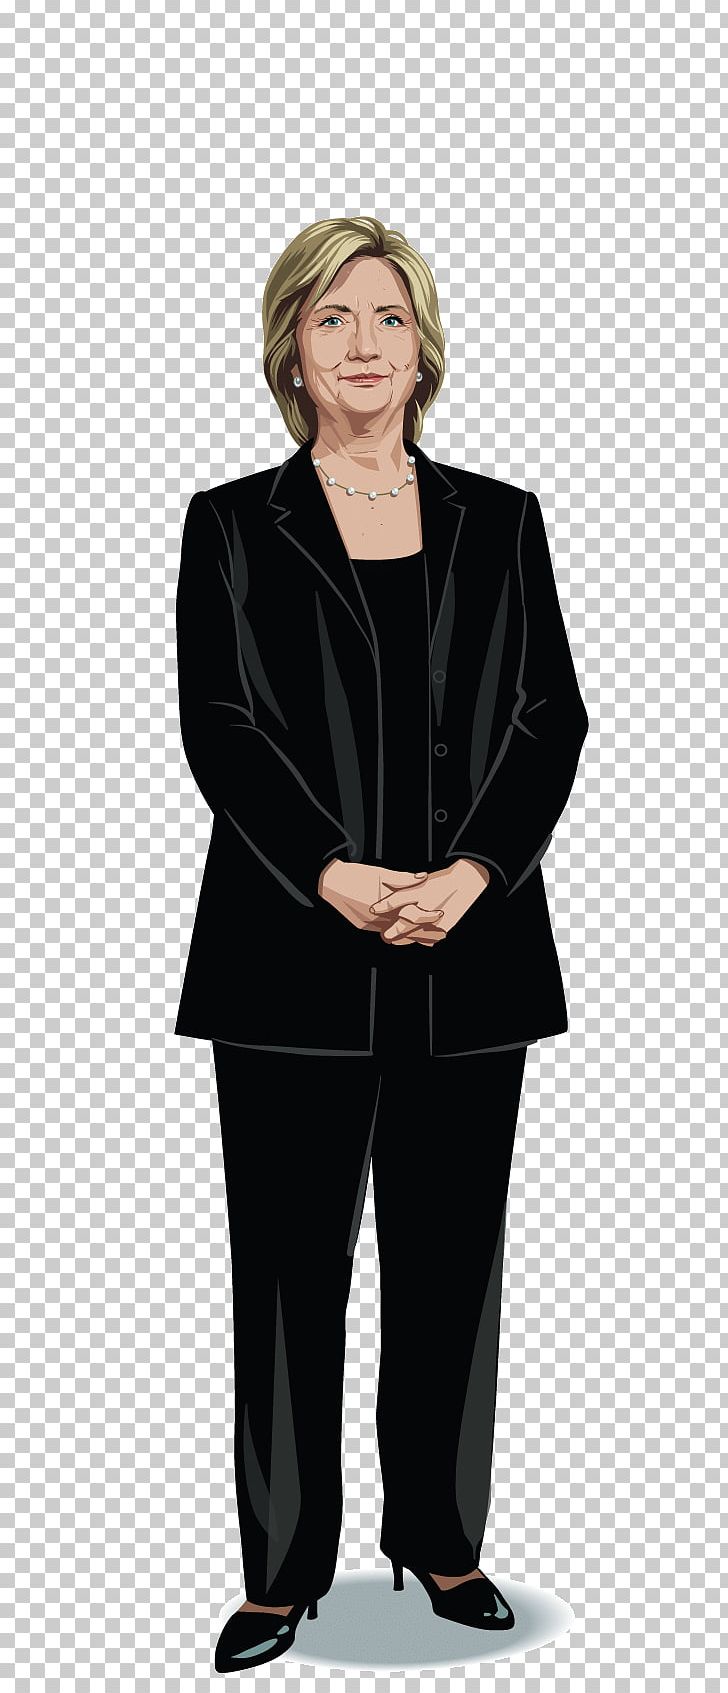 Hillary Clinton United States Of America US Presidential Election 2016 United States Presidential Election PNG, Clipart, Barack Obama, Bill Clinton, Business, Celebrities, Formal Wear Free PNG Download